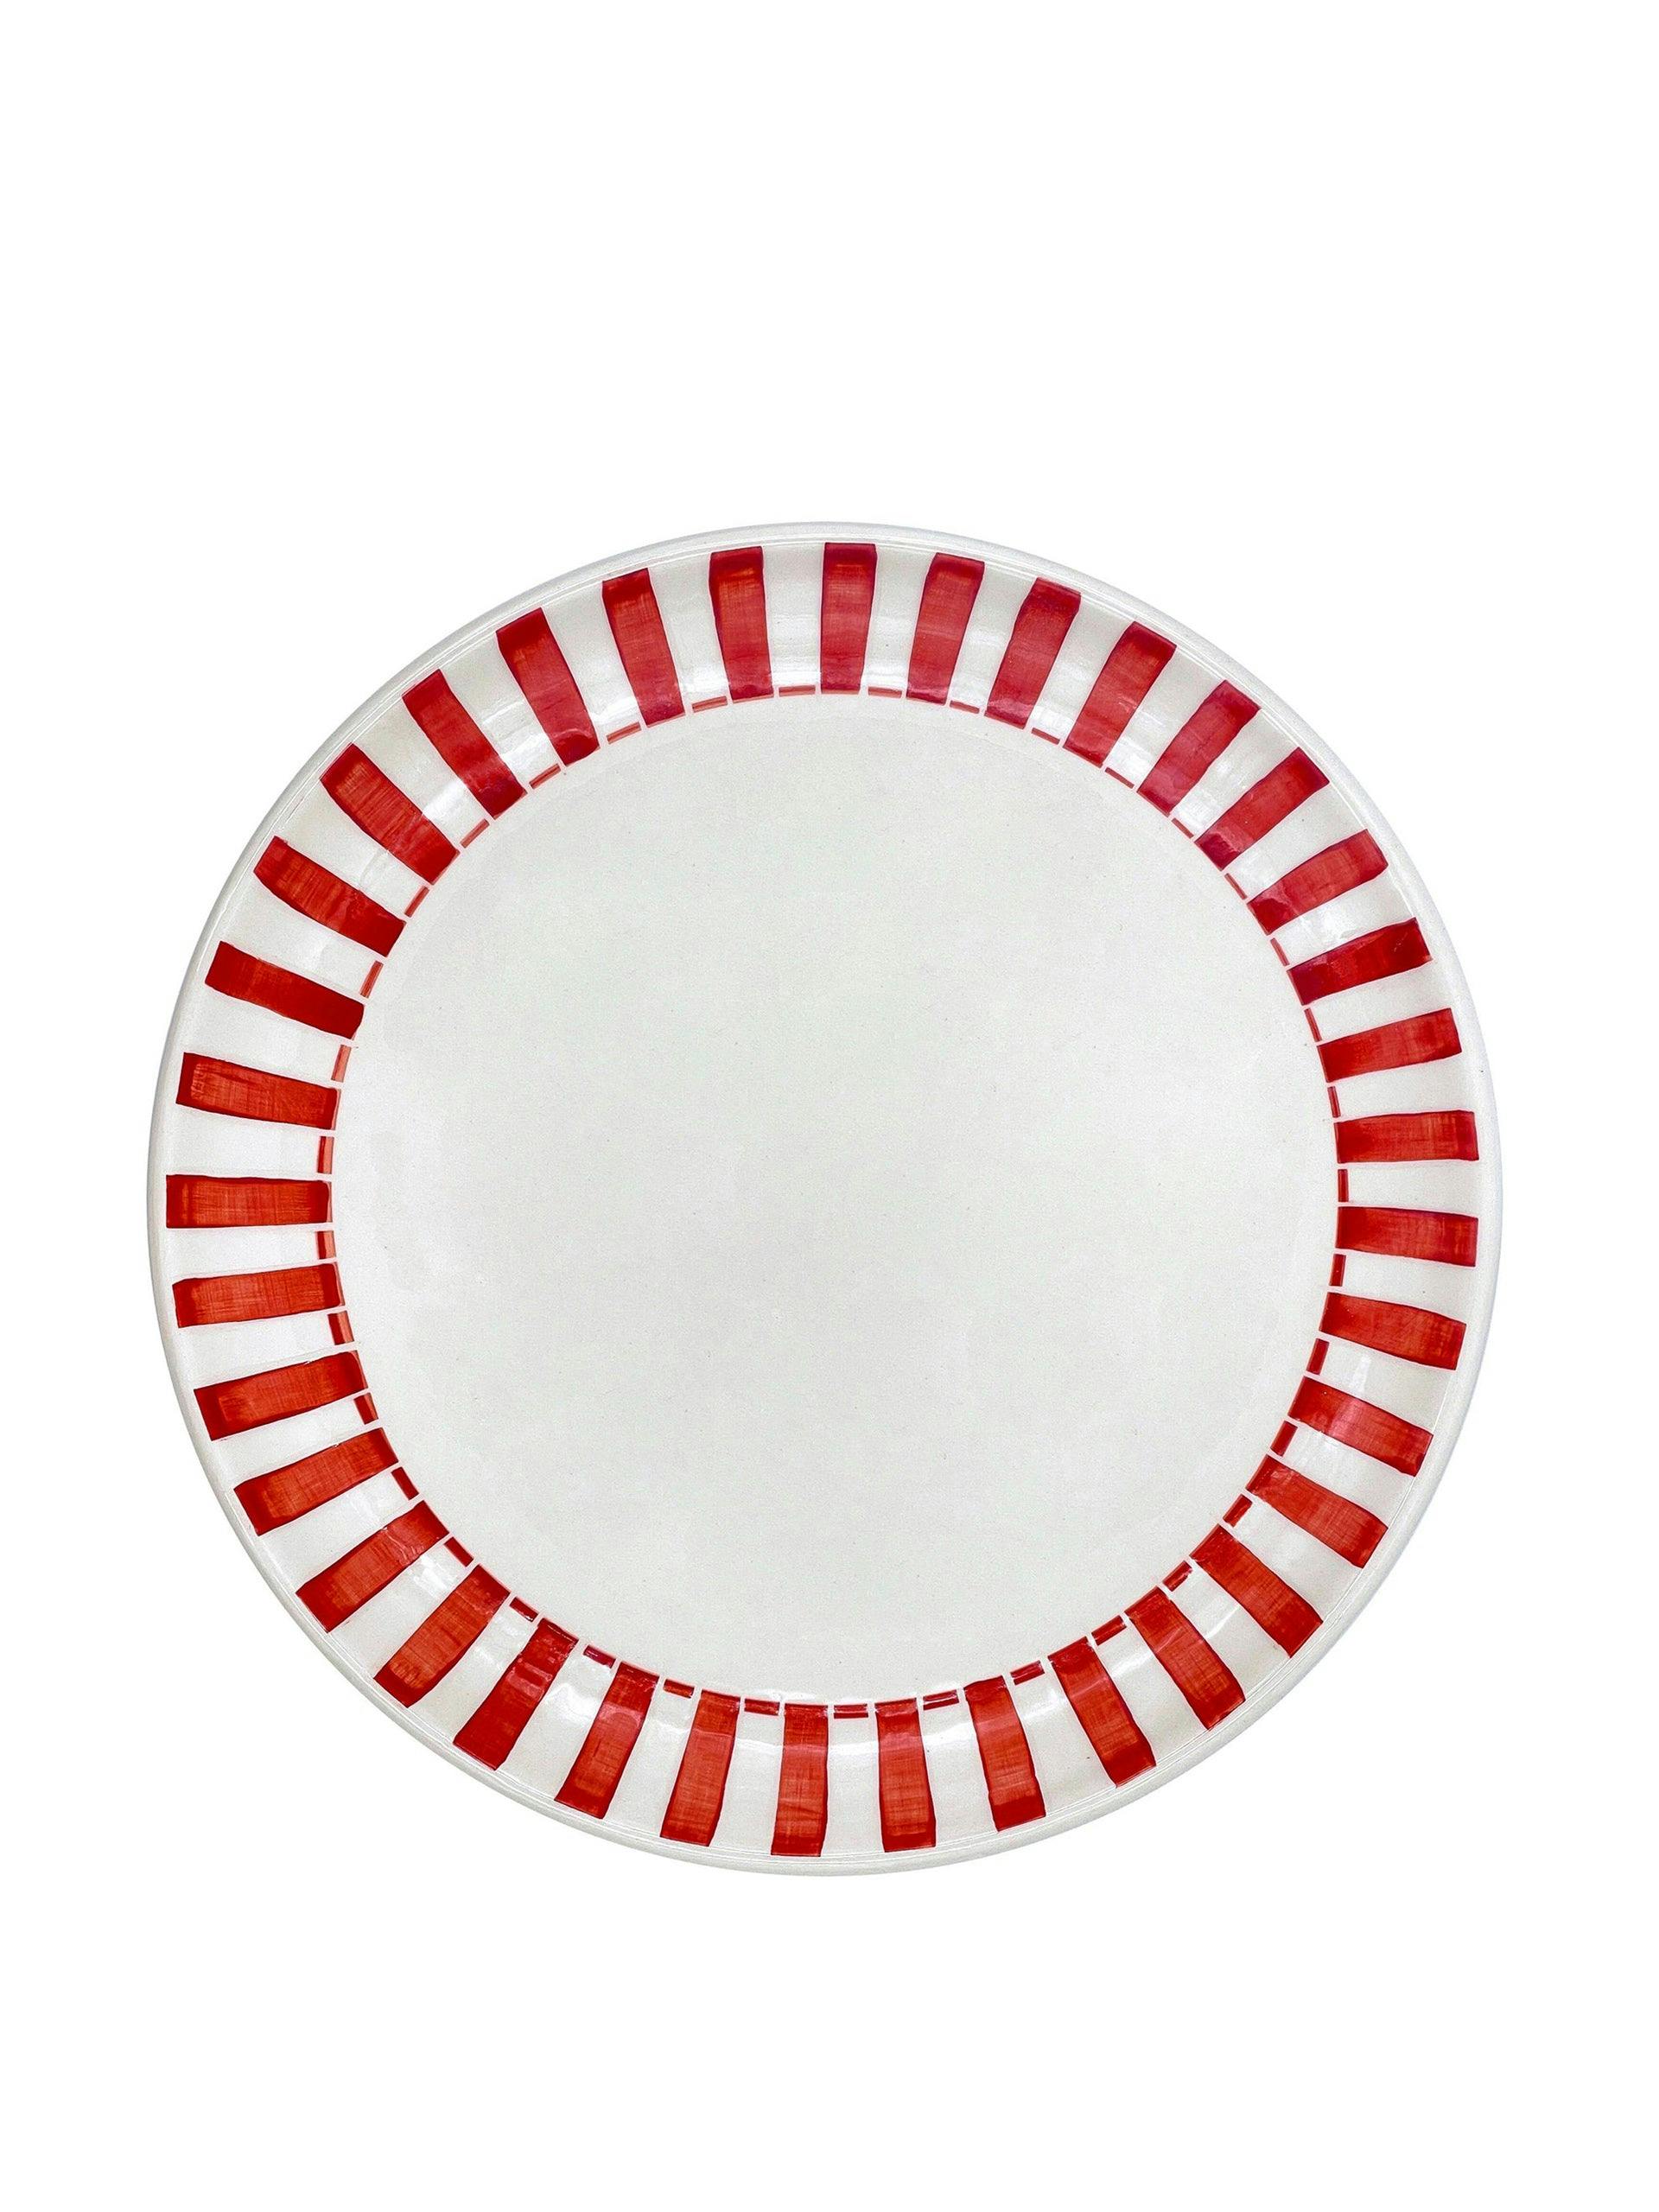 Large plate with red striped border